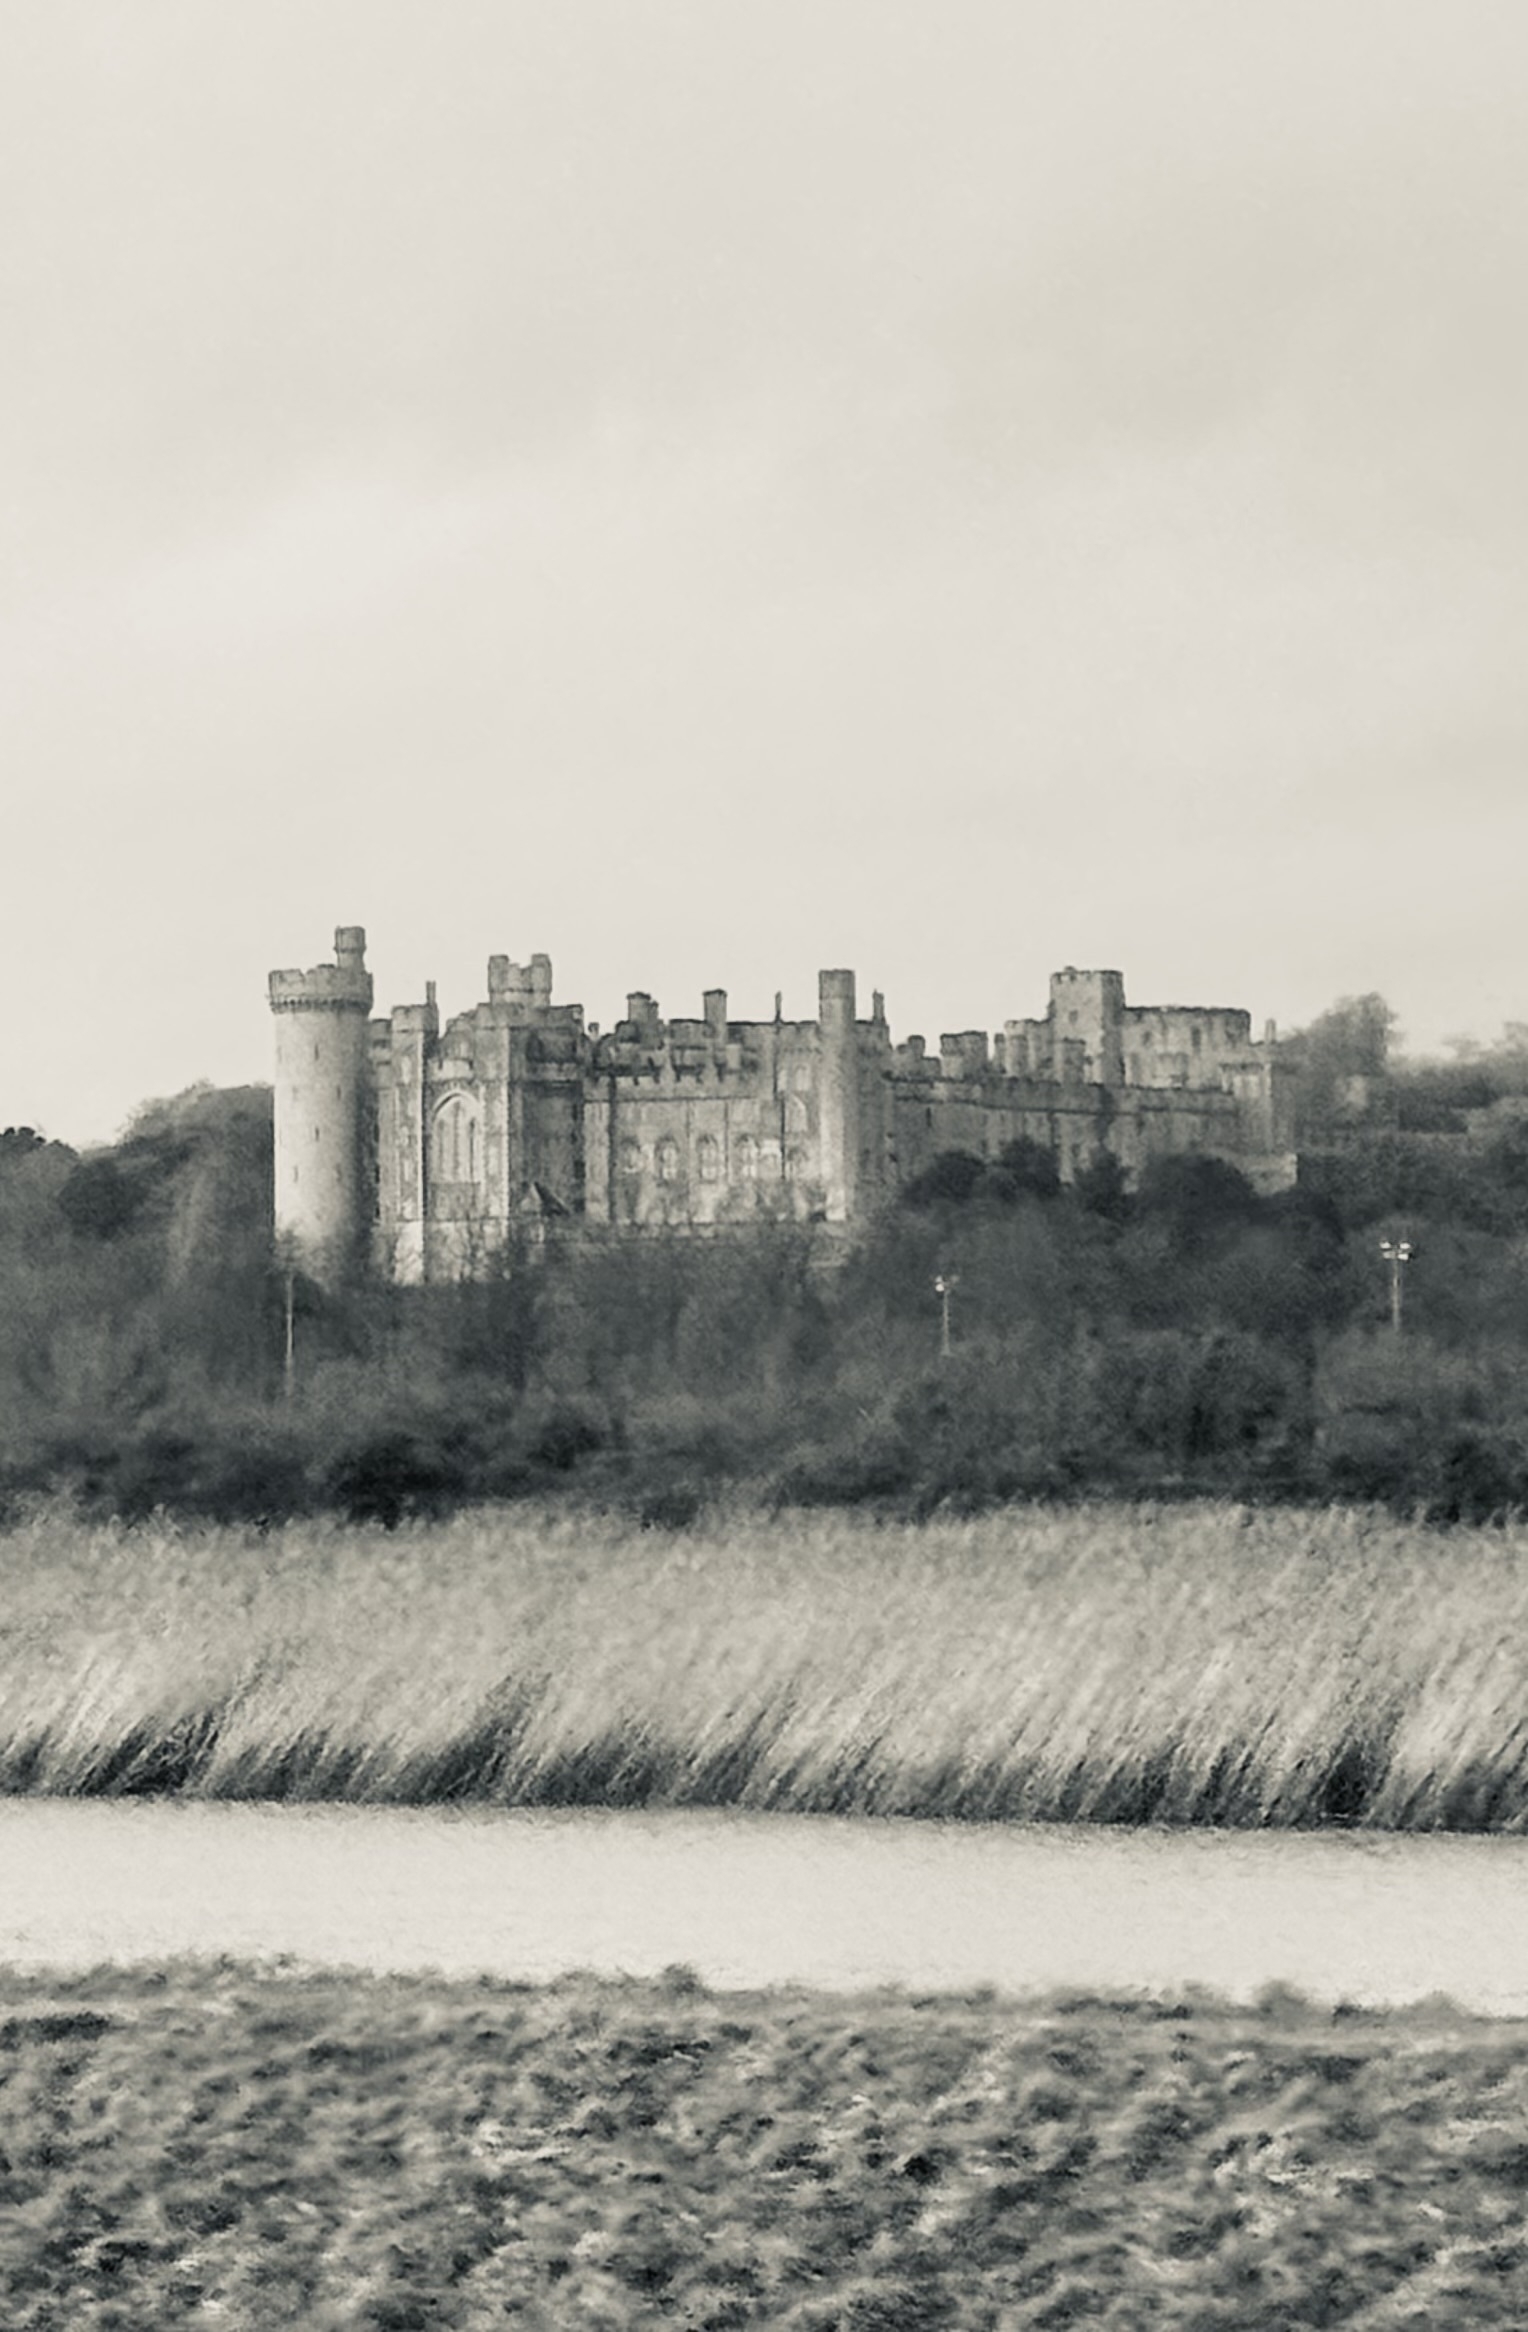 A slightly fuzzy black and white photo of Arundel castle taken from a train.